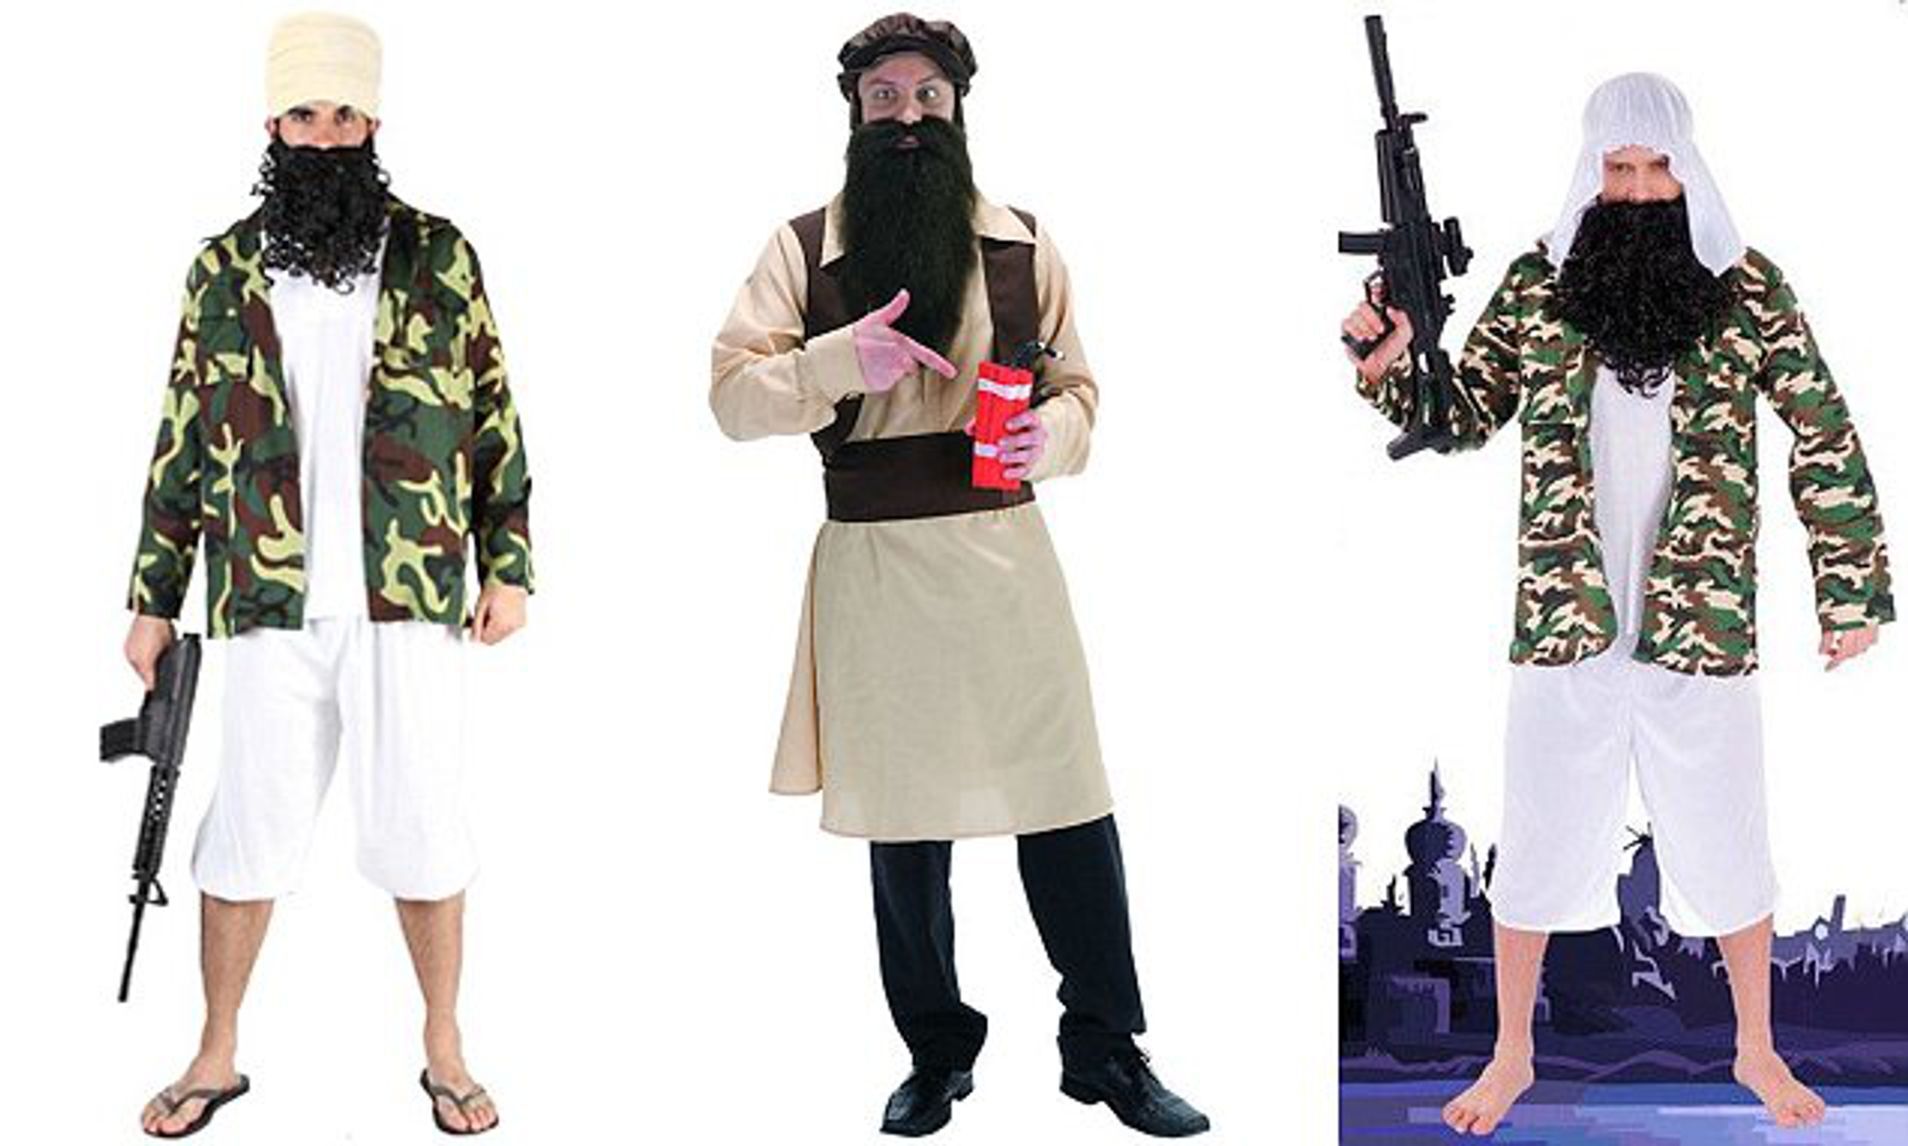 Never wear this: 10 of the most offensive Halloween costume ideas